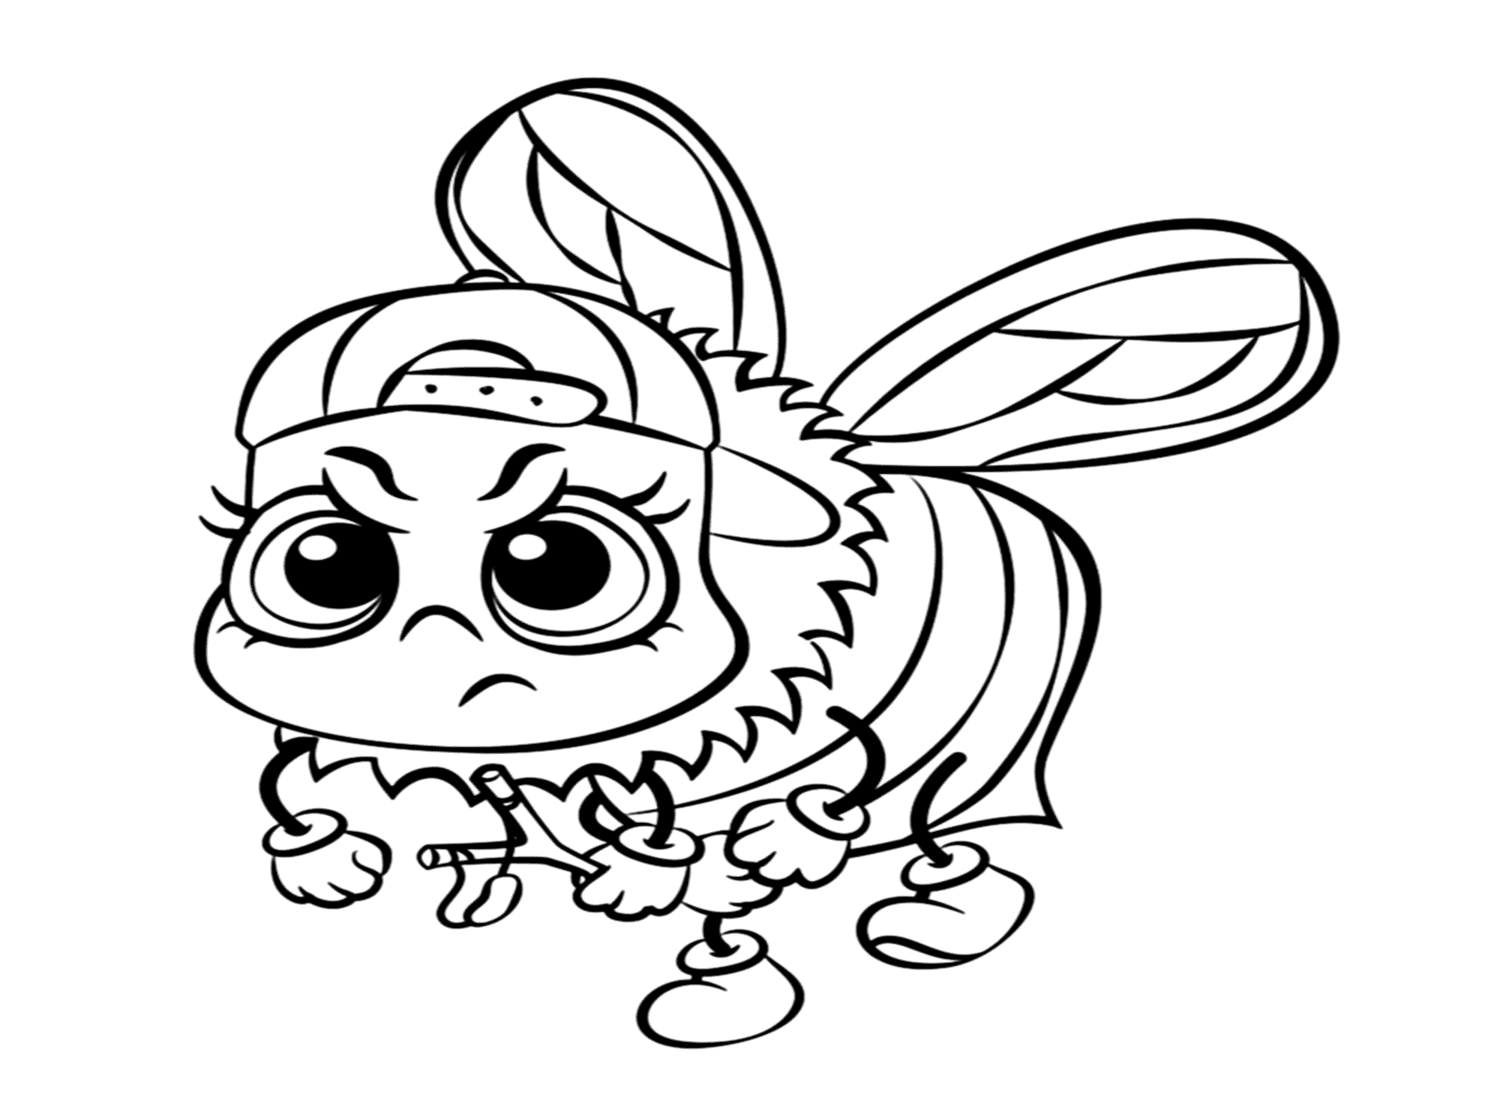 Cute Wasp Coloring Page from Wasp